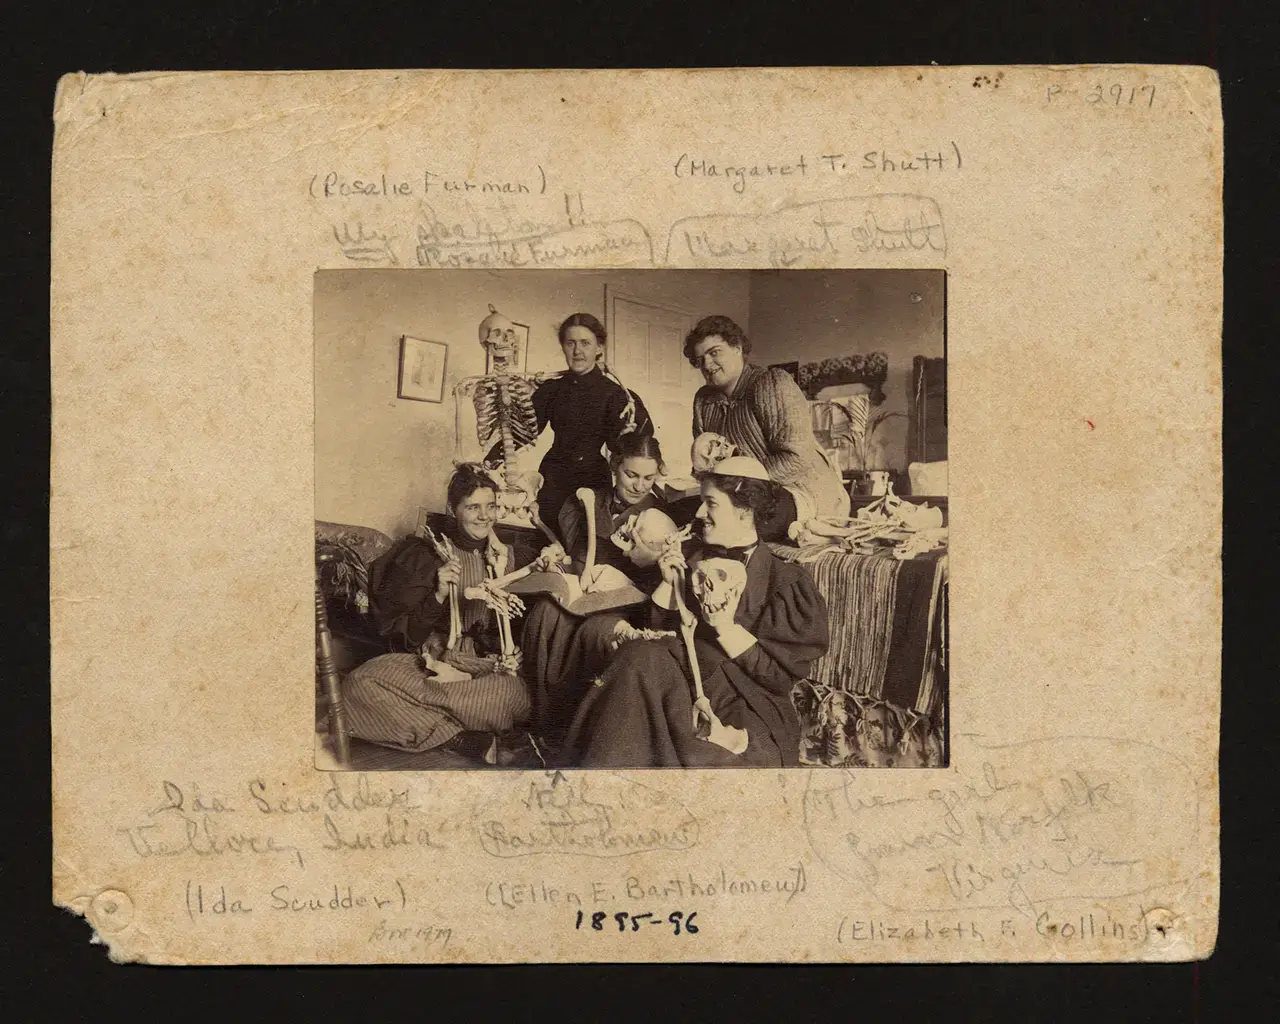 Woman&#39;s Medical College of Pennsylvania students with skeletons, circa 1895. Courtesy of Drexel University College of Medicine Legacy Center Archives and Special Collections, Woman&#39;s Medical College of Pennsylvania Photograph Collection.